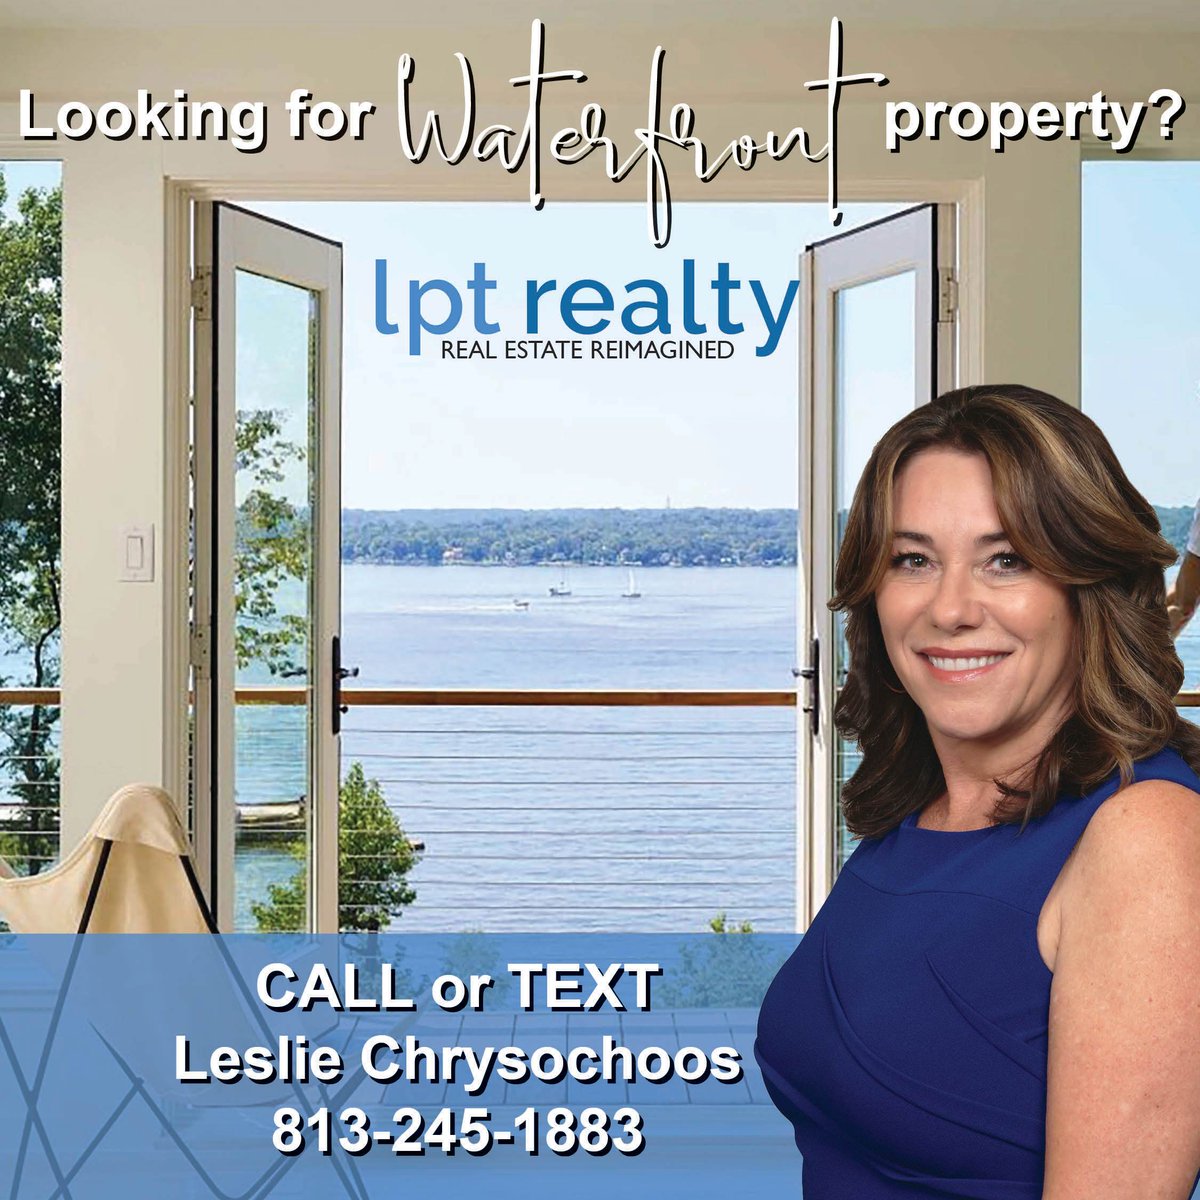 Looking for waterfront property?
Call or text me and I can help you find your dream home.

#realestate #luxuryhomes #tampabayhomes #lptrealty #LptMagic #RealEstateReimagined #lptsocials #tampahomefinders #tamparealtor #813realtor #tampabay #realestateagent #relocatetoFlorida...